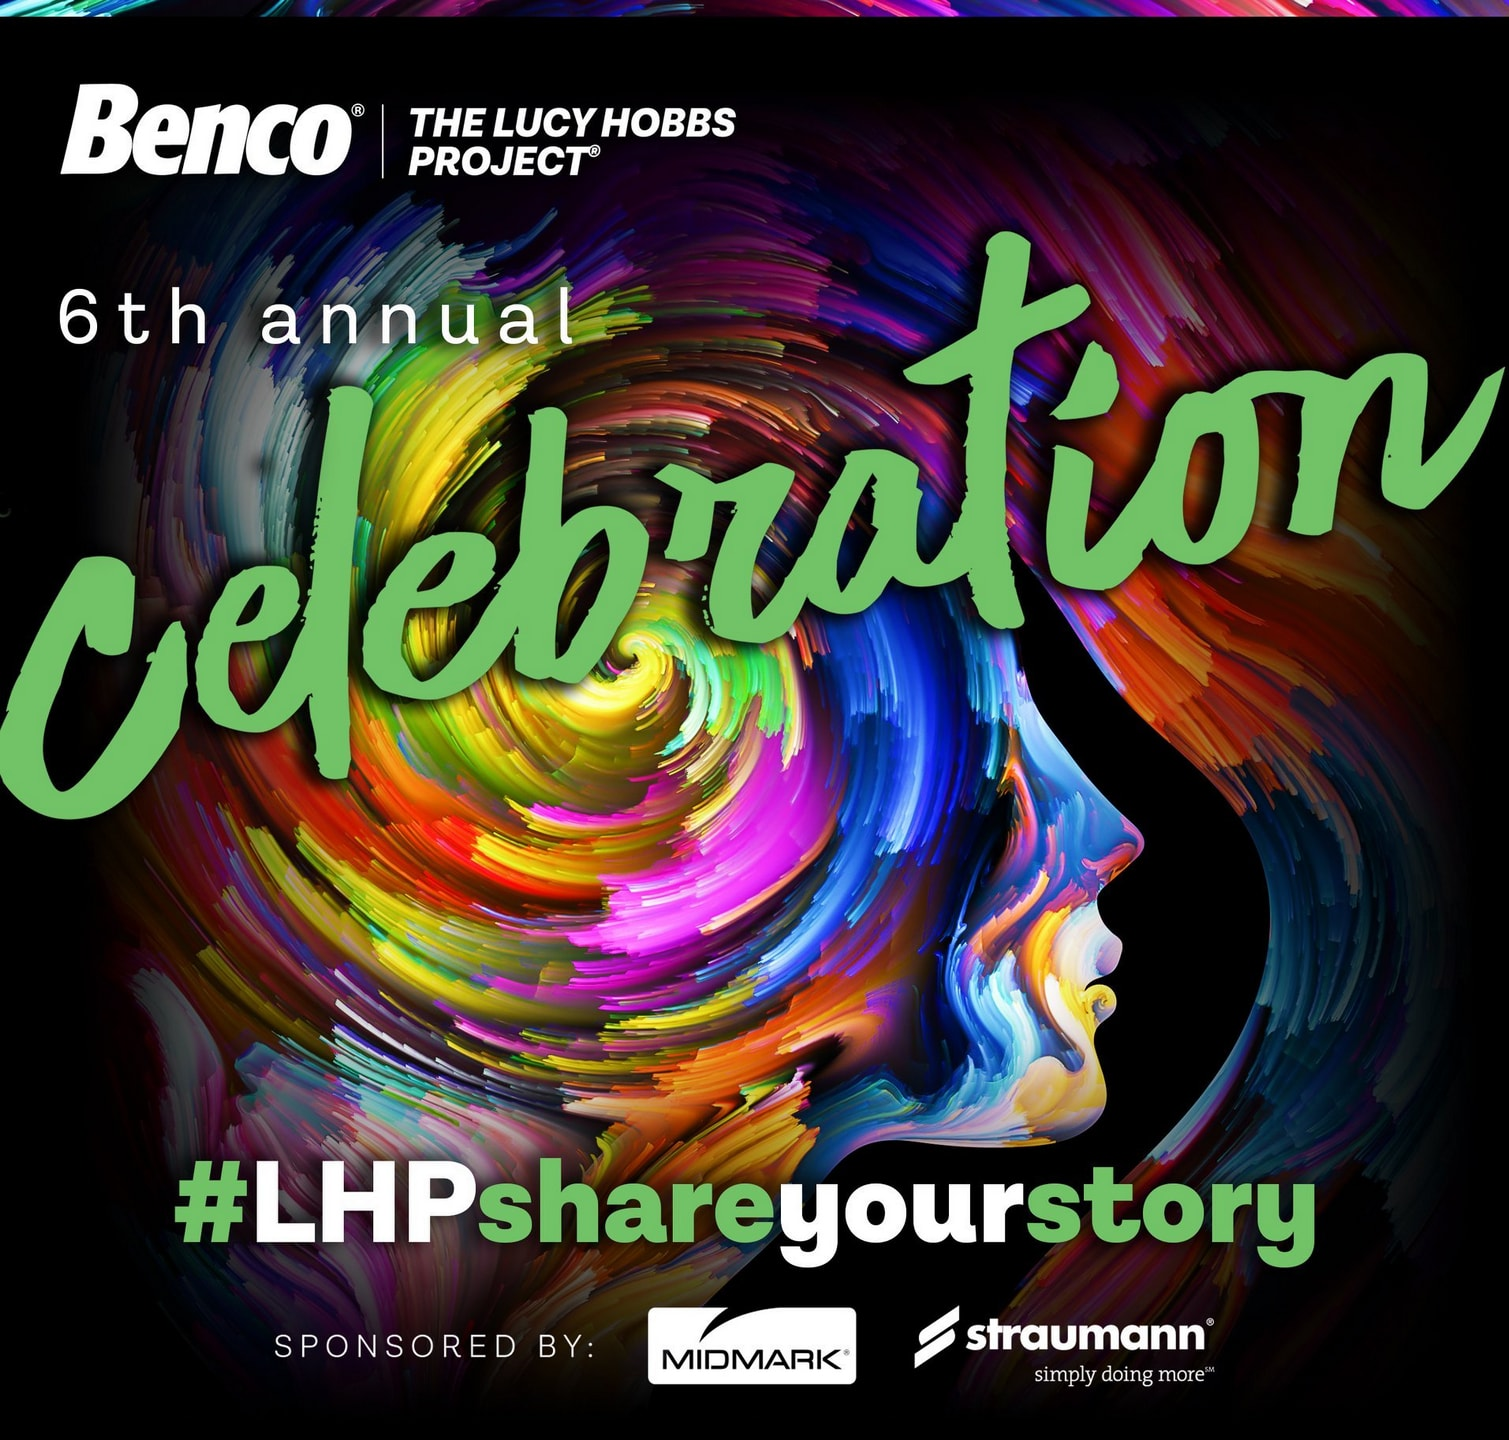 Enter the #LHPshareyourstory contest